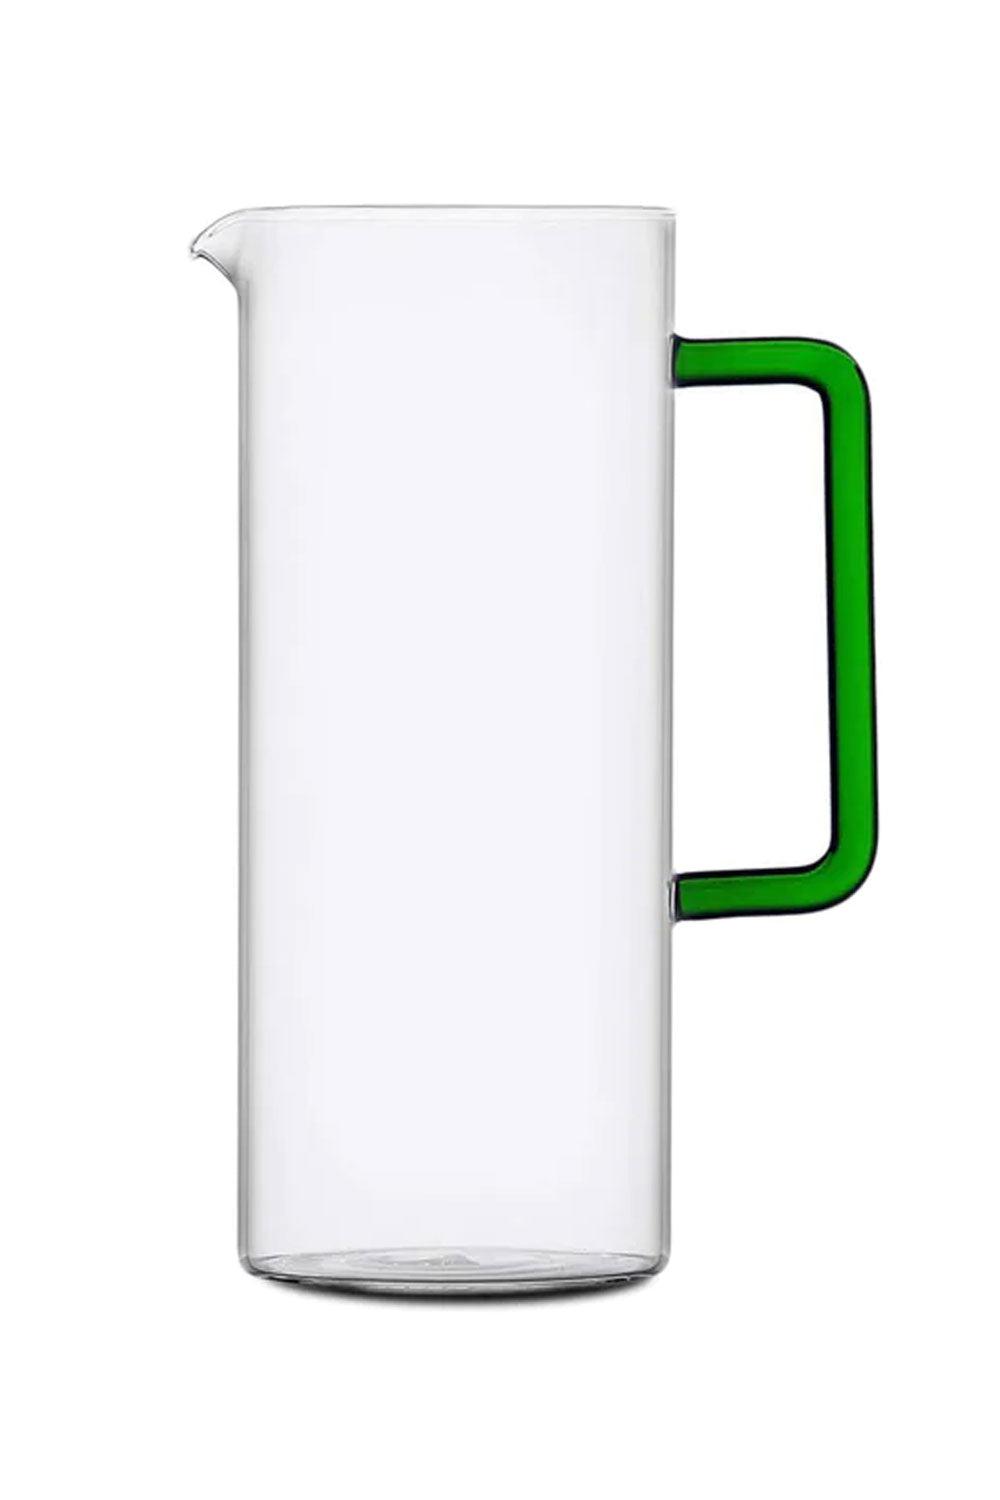 Tube Jug with Green Handle, 1.2L